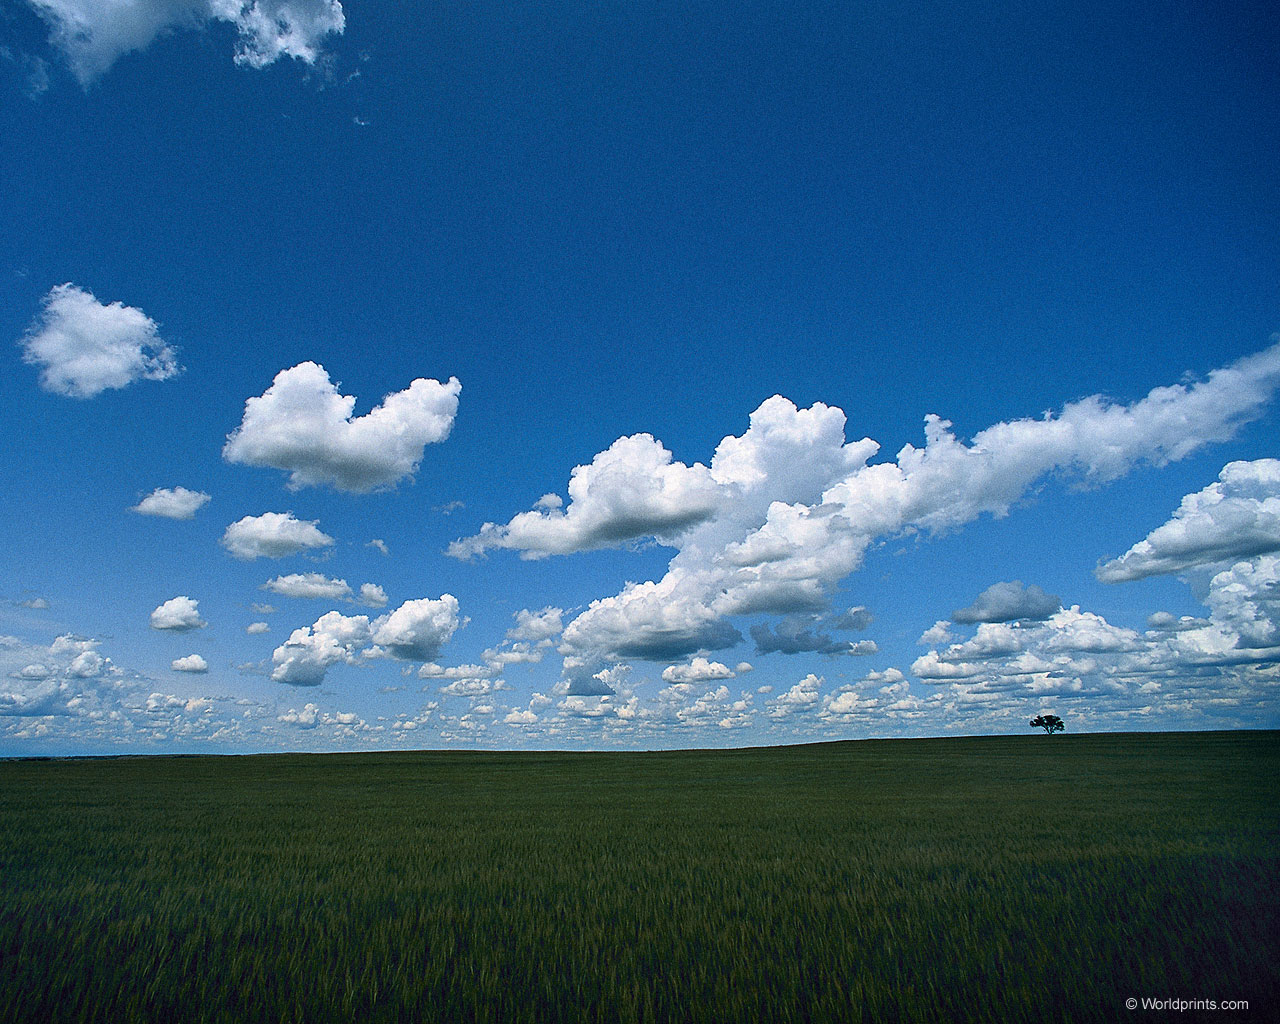 Download full size Clouds wallpaper / Nature / 1280x1024